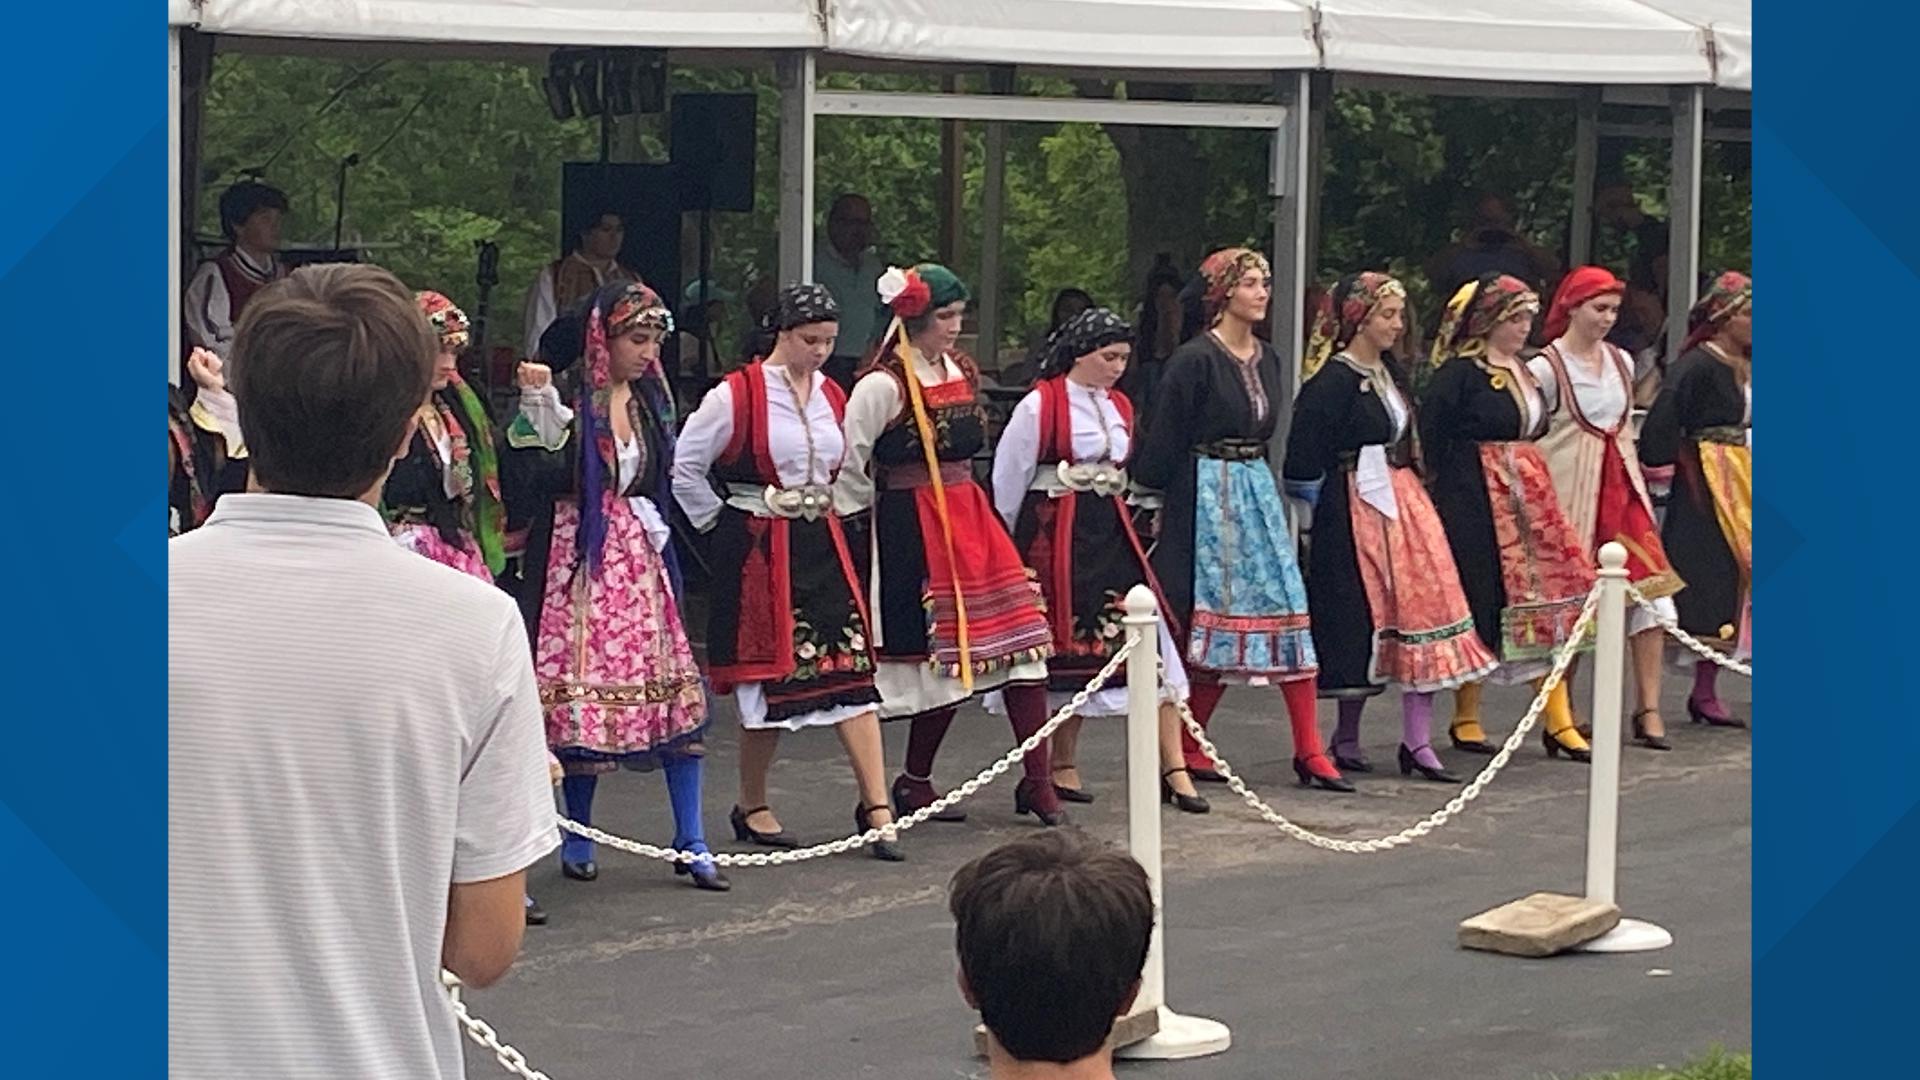 This weekend, a local tradition continues. The St. Louis County Greek Festival expects to see about 15,000 visitors through Monday.